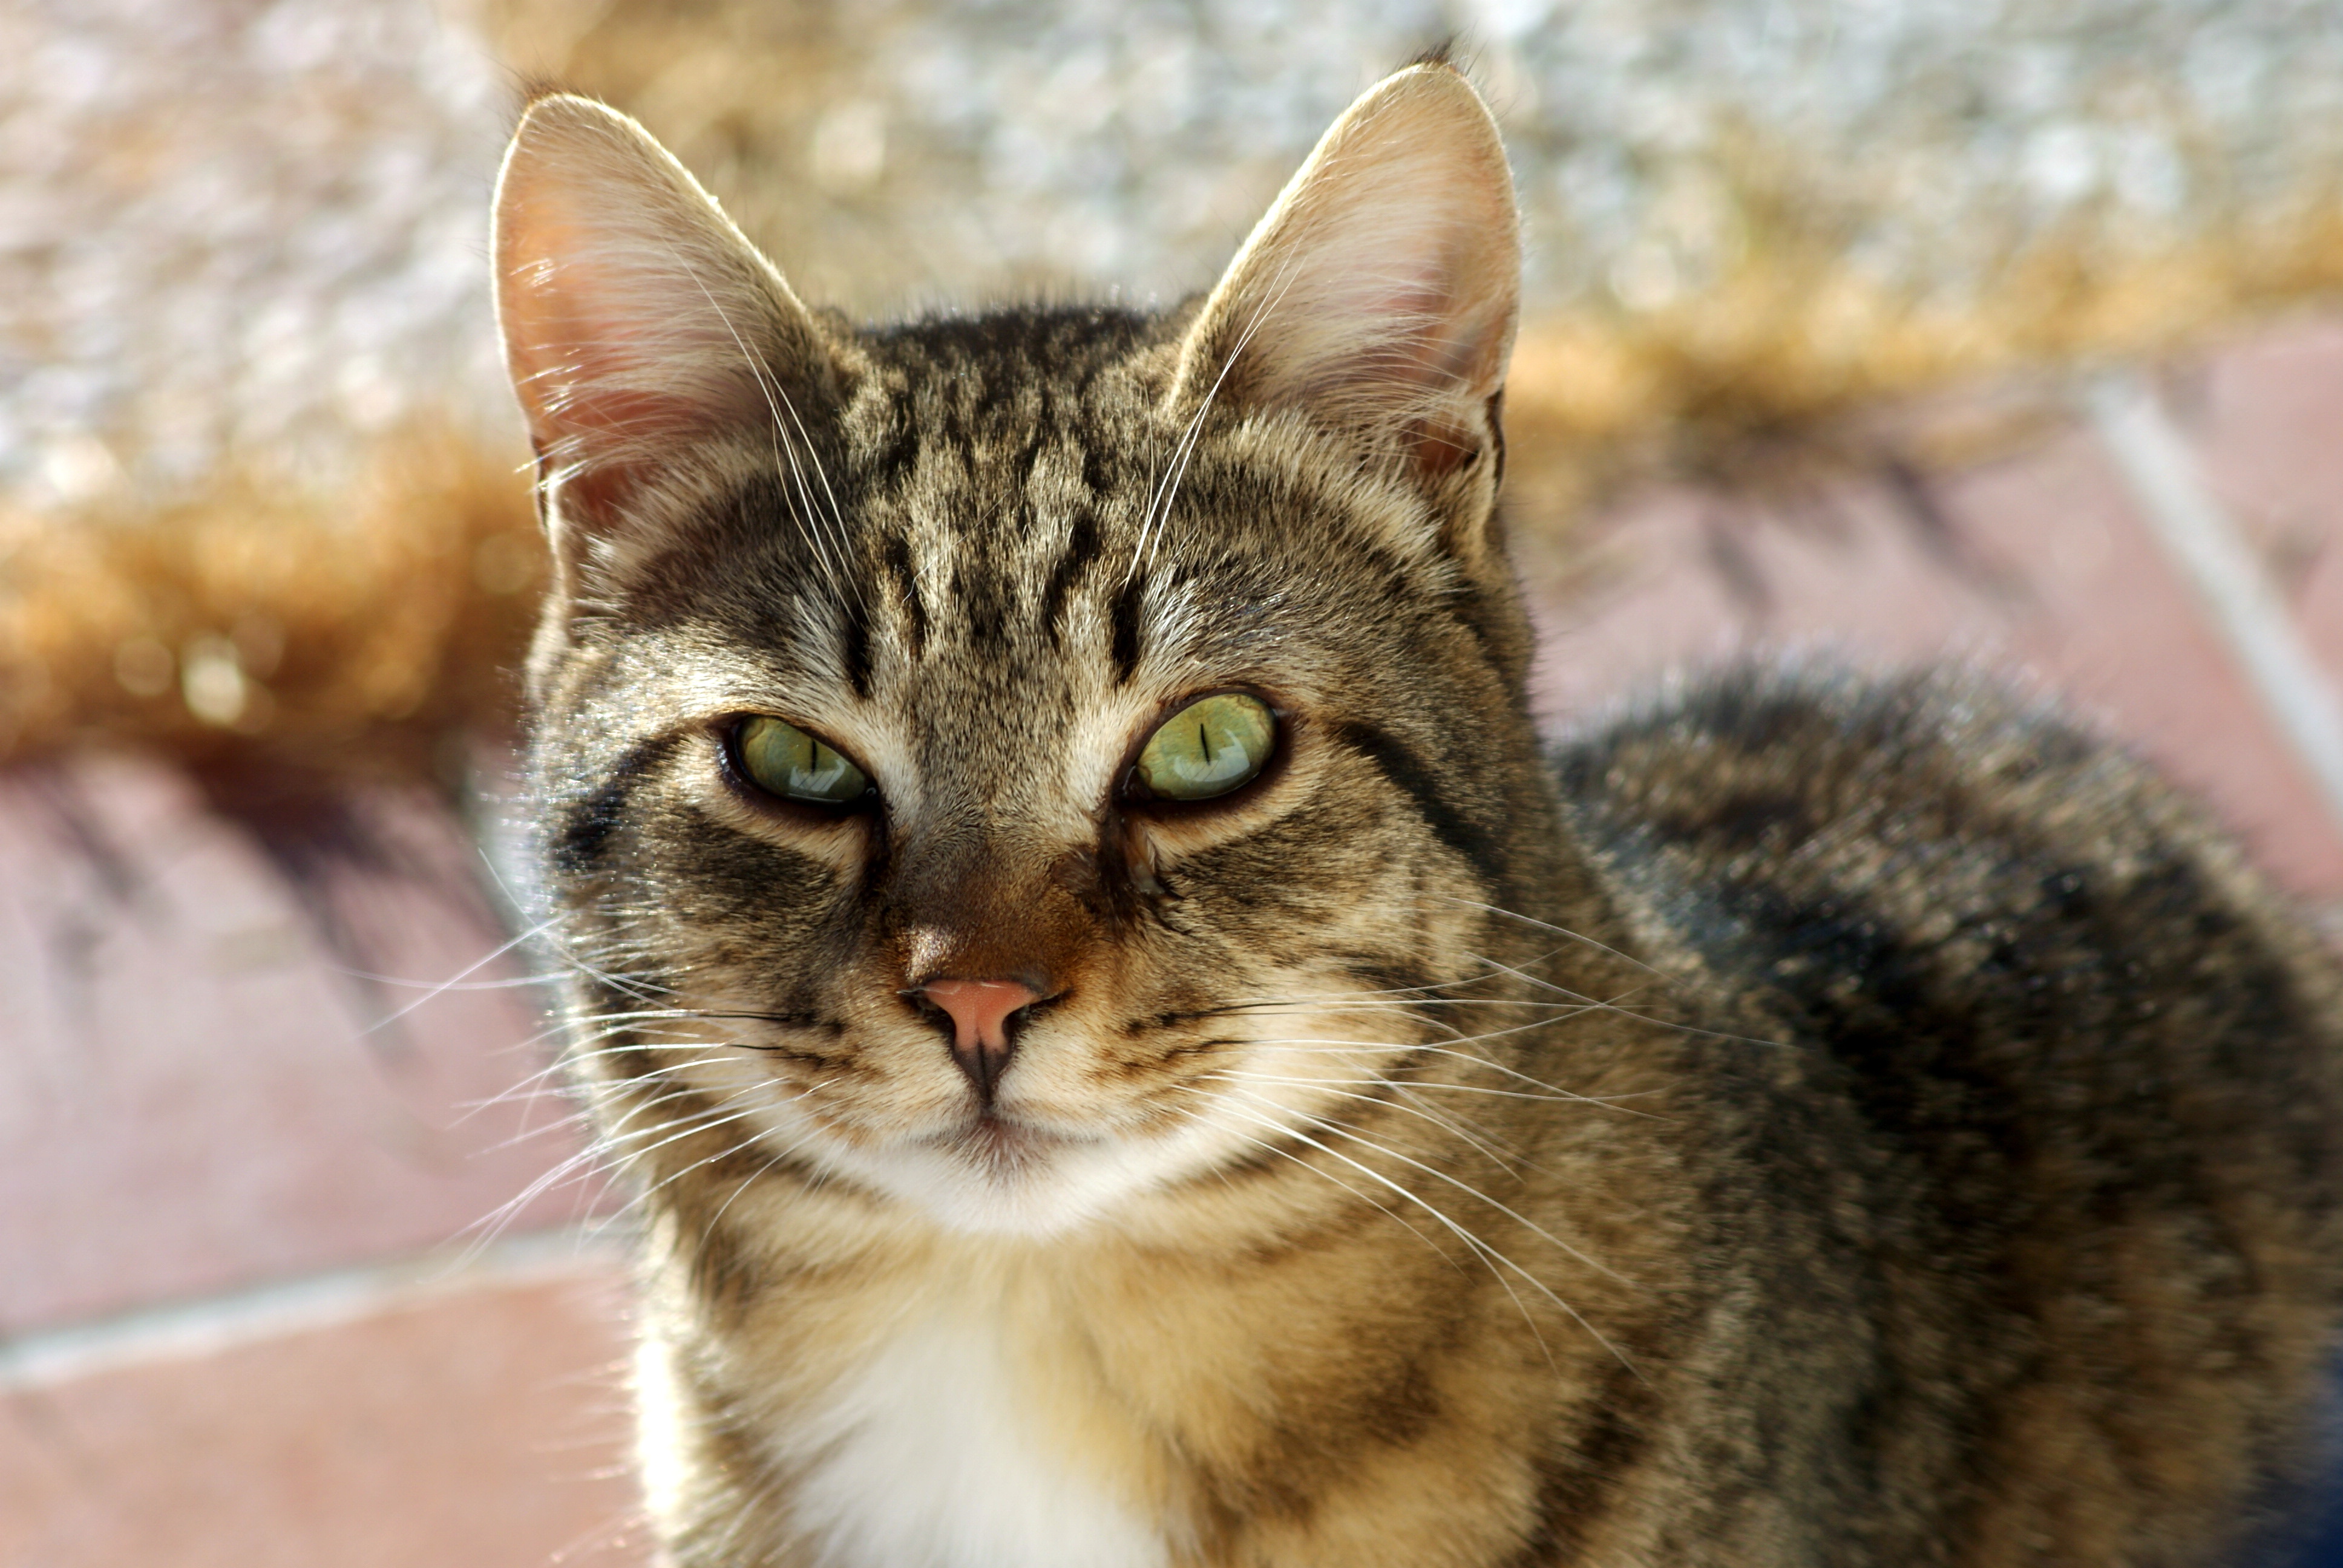 Cracking the Code of Aggression: Insights into Your Cat's Display of Hostility